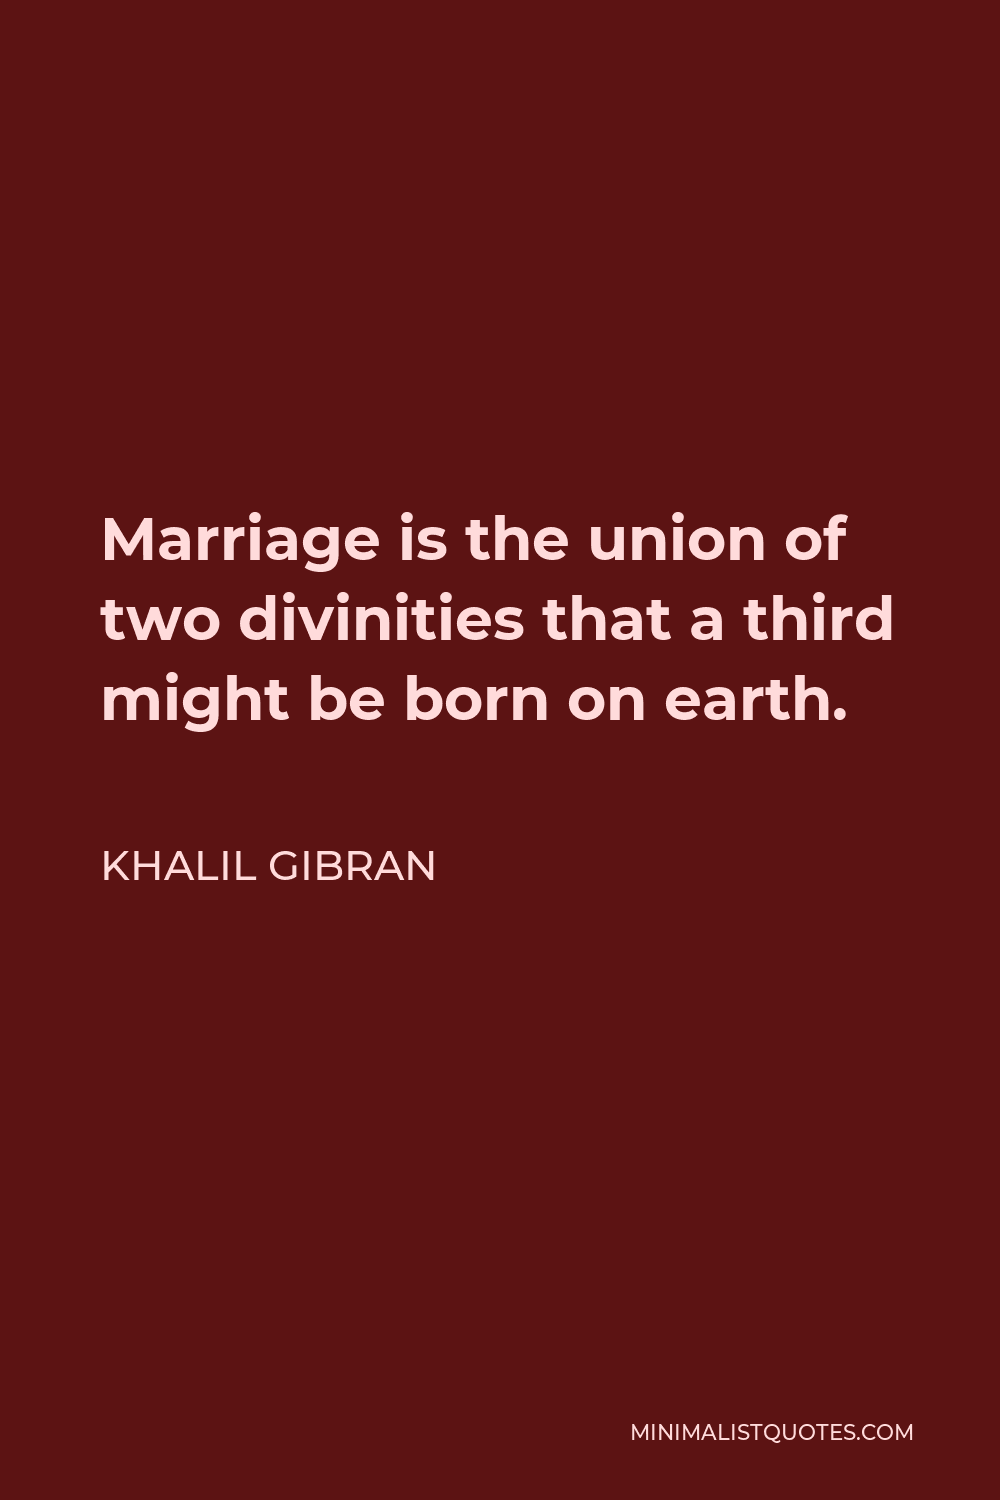 Khalil Gibran Quote - Marriage is the union of two divinities that a third might be born on earth.